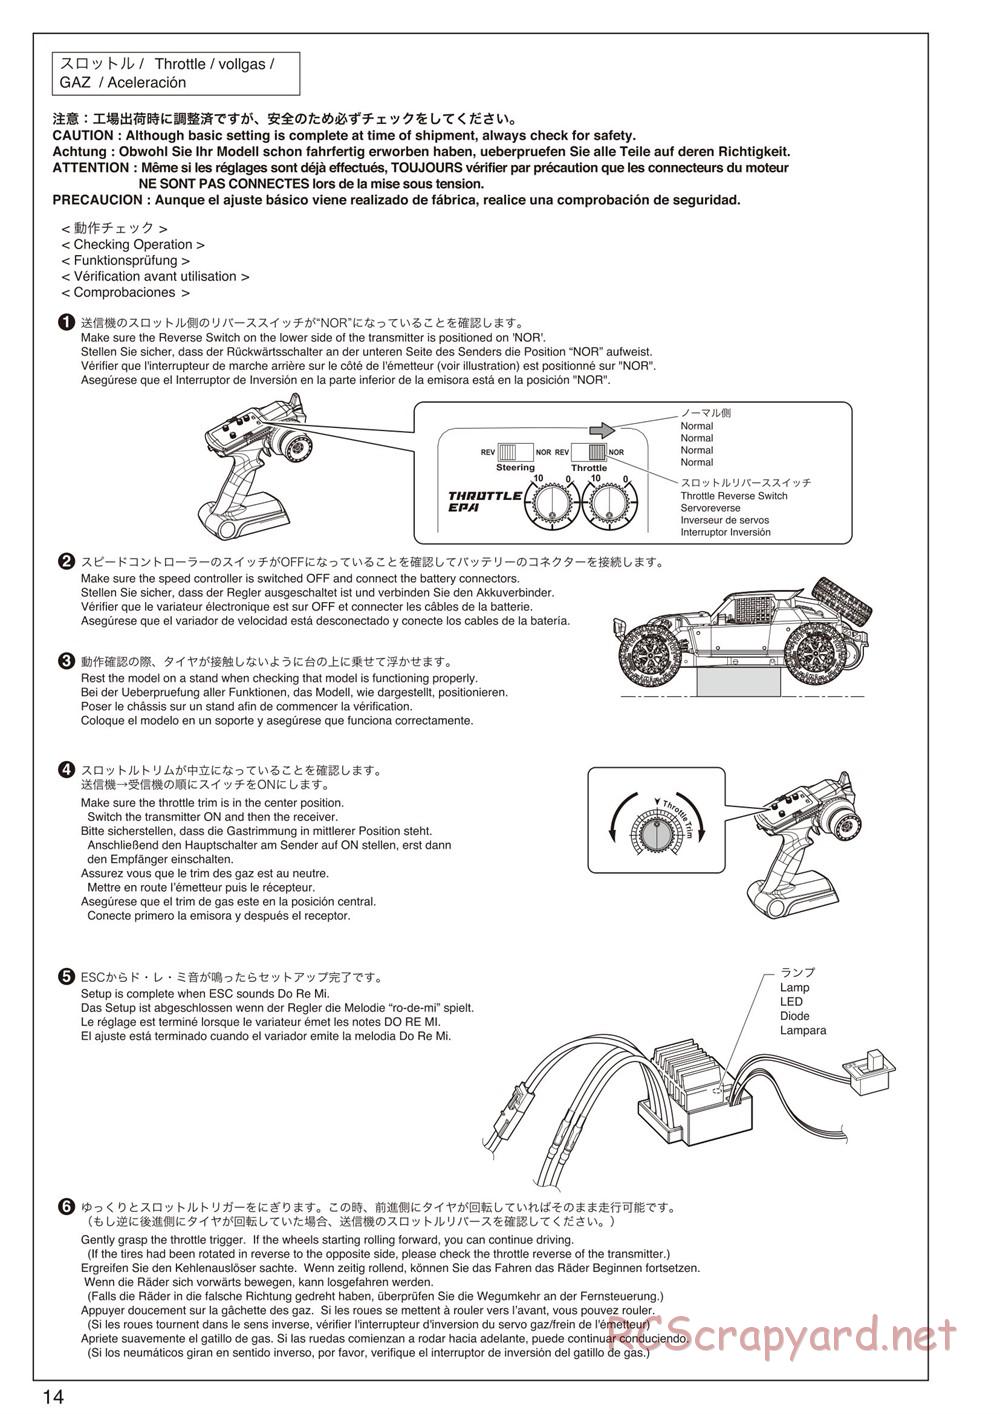 Kyosho - Axxe 2WD Desert Buggy - Manual - Page 14